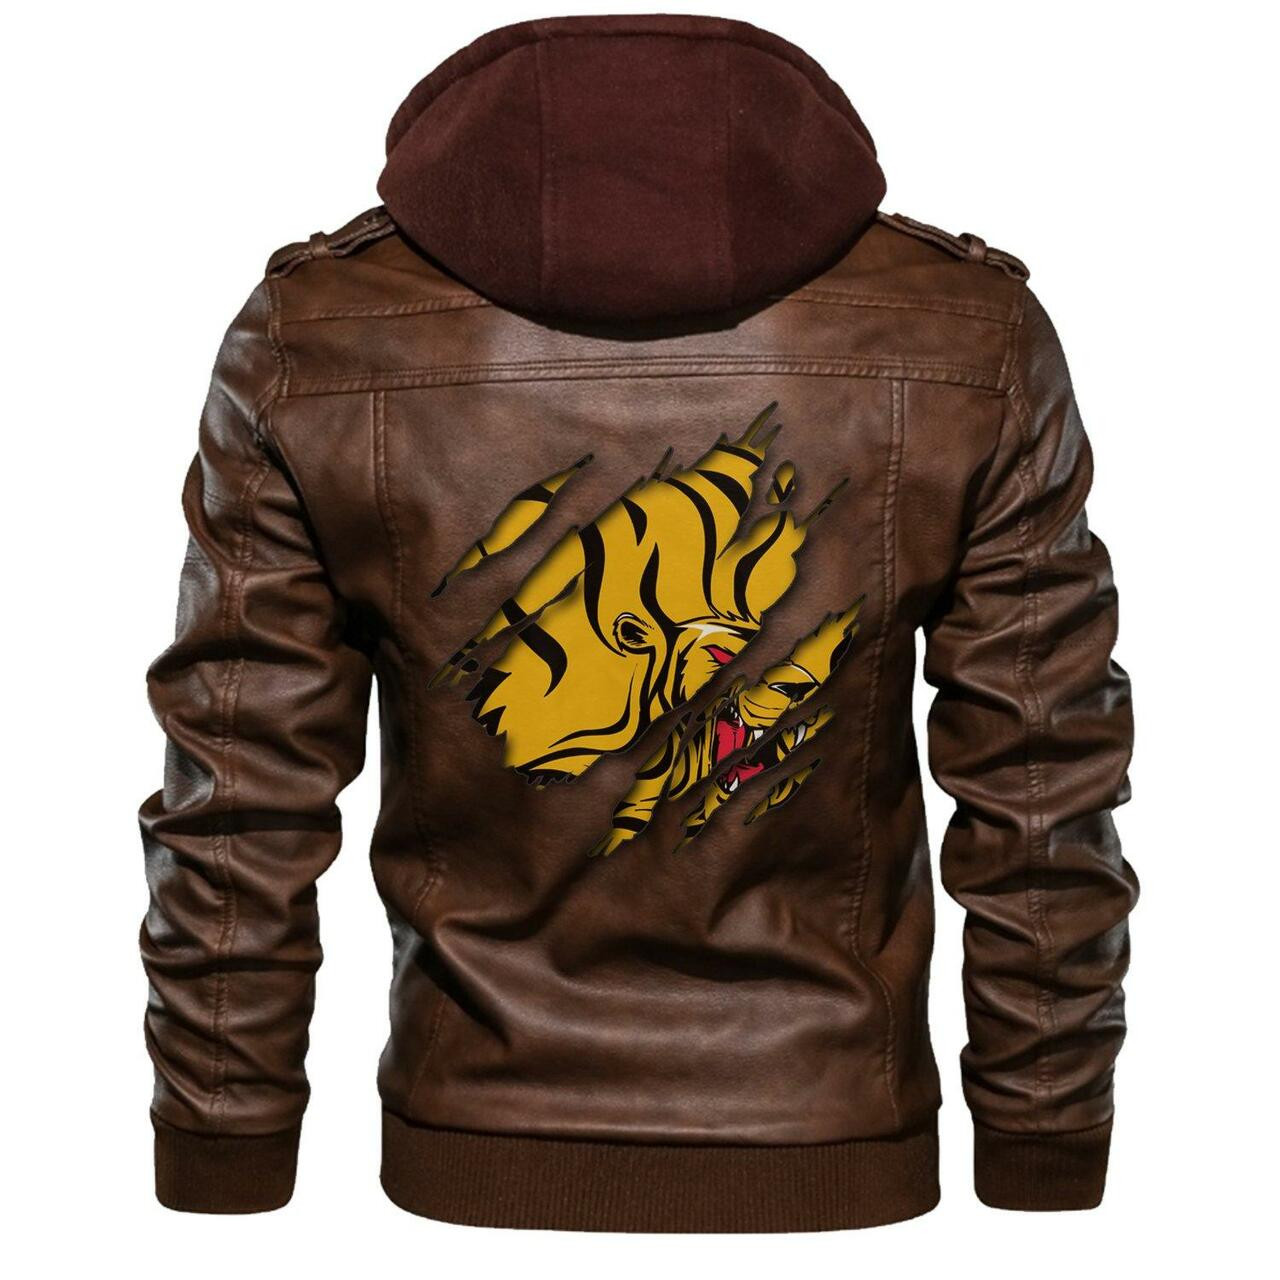 You'll have the perfect jacket in no time by clicking the link below 165